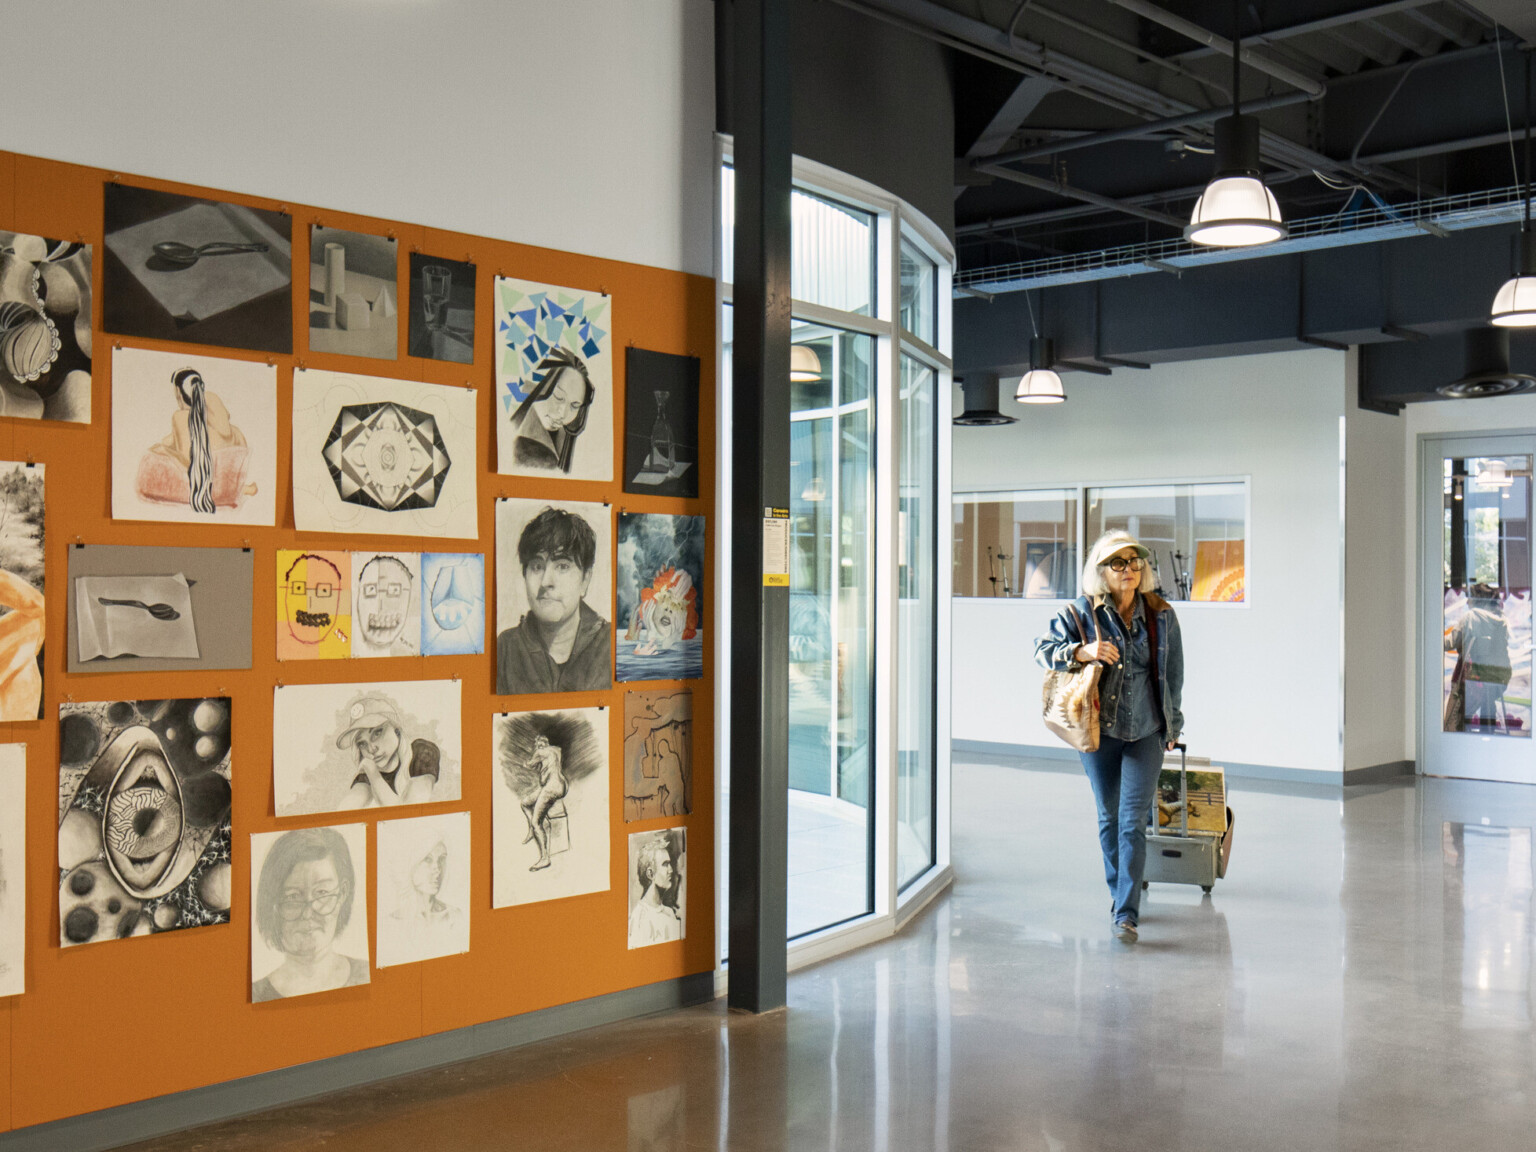 Interior rounded hallway with orange accent wall with student art work hanging on it, floor to ceiling window beyond